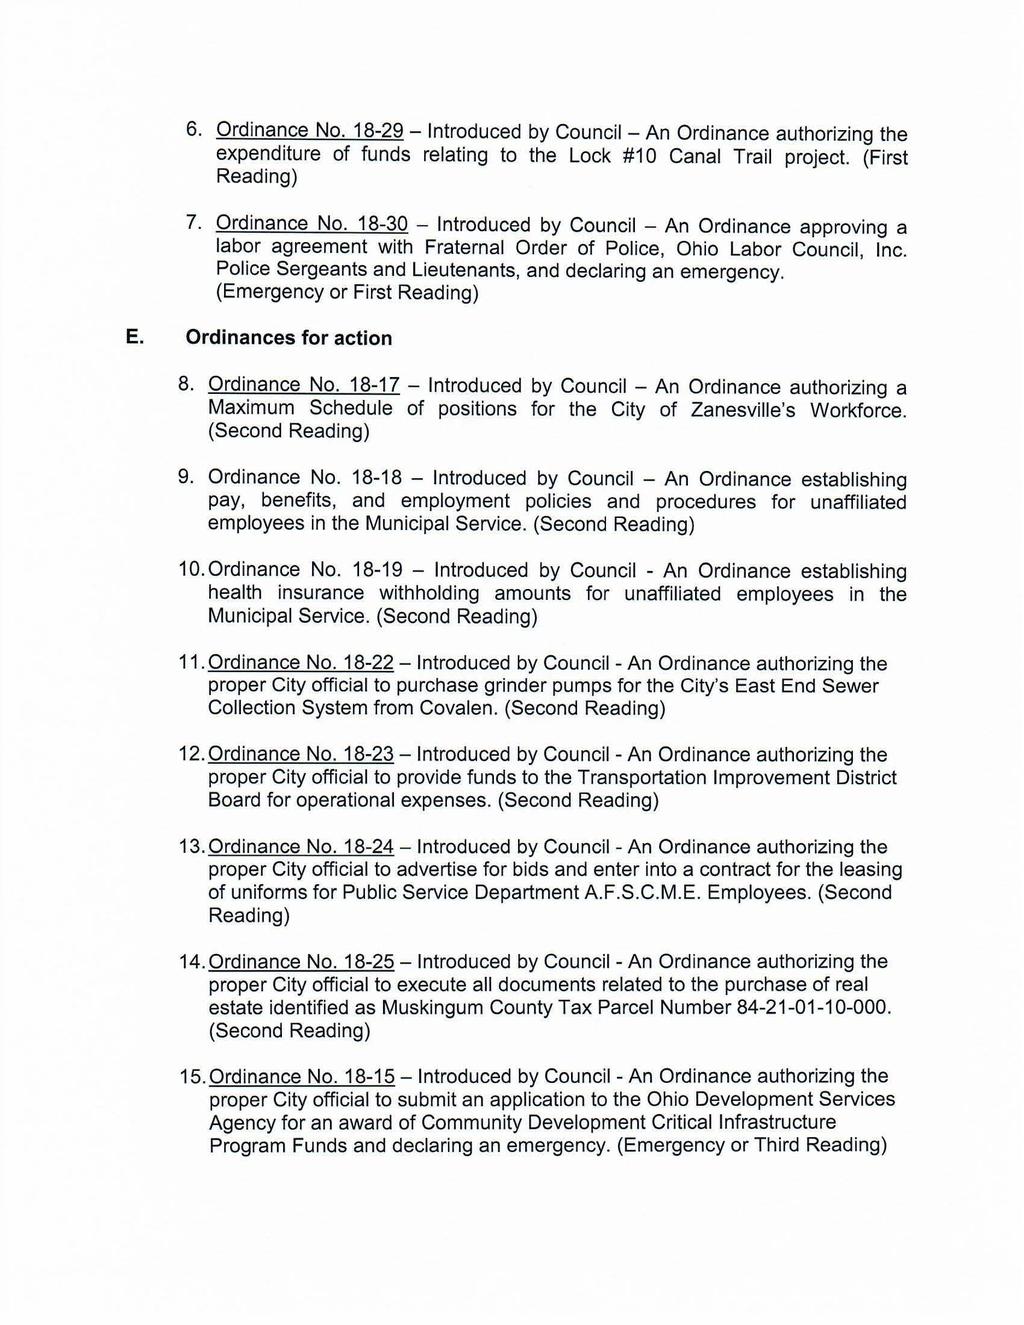 6. Ord inance No. 18-29 - Introduced by Council - An Ordinance authorizing the expenditure of funds relating to the Lock #10 Canal Trail project. (First Reading) 7. Ordinance No.